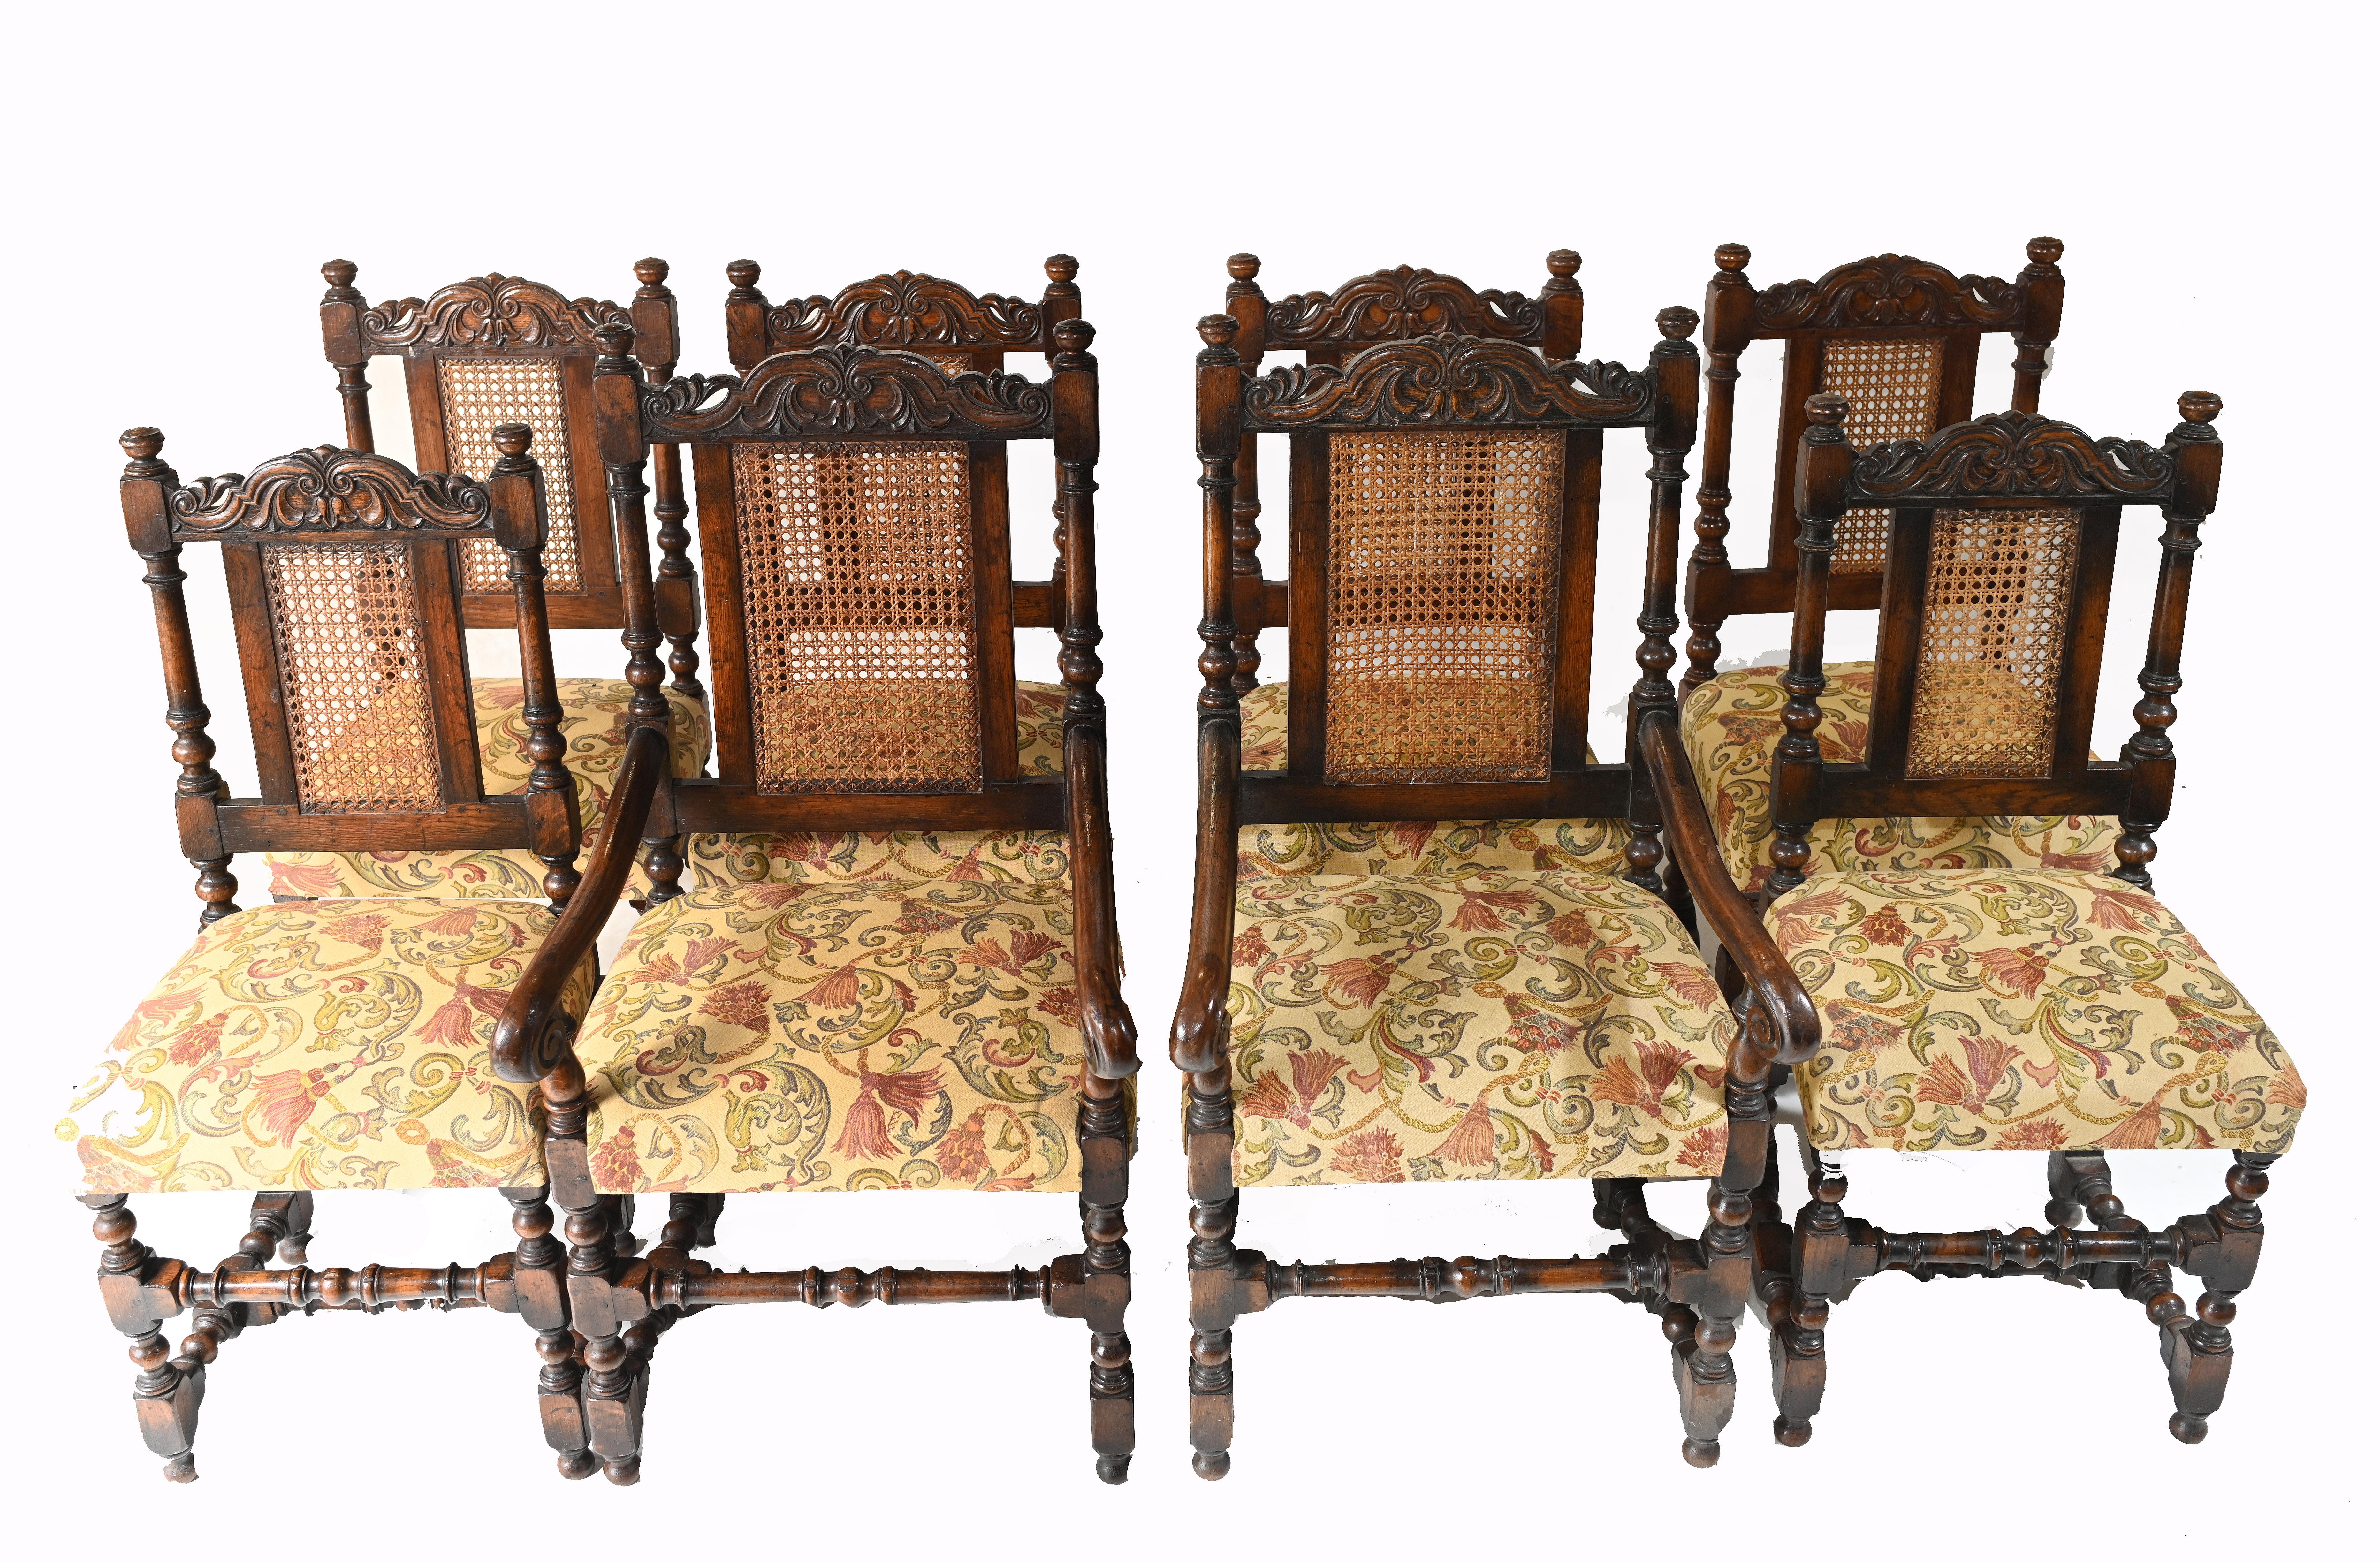 Glorious set of 8 antique farmhouse dining chairs with barley twist design
Circa 1890 on this set
Set consists of 6 side chairs and 6 side chairs
Very comfortable to sit in with cushioned seats
Lots of hand carved details
We have various